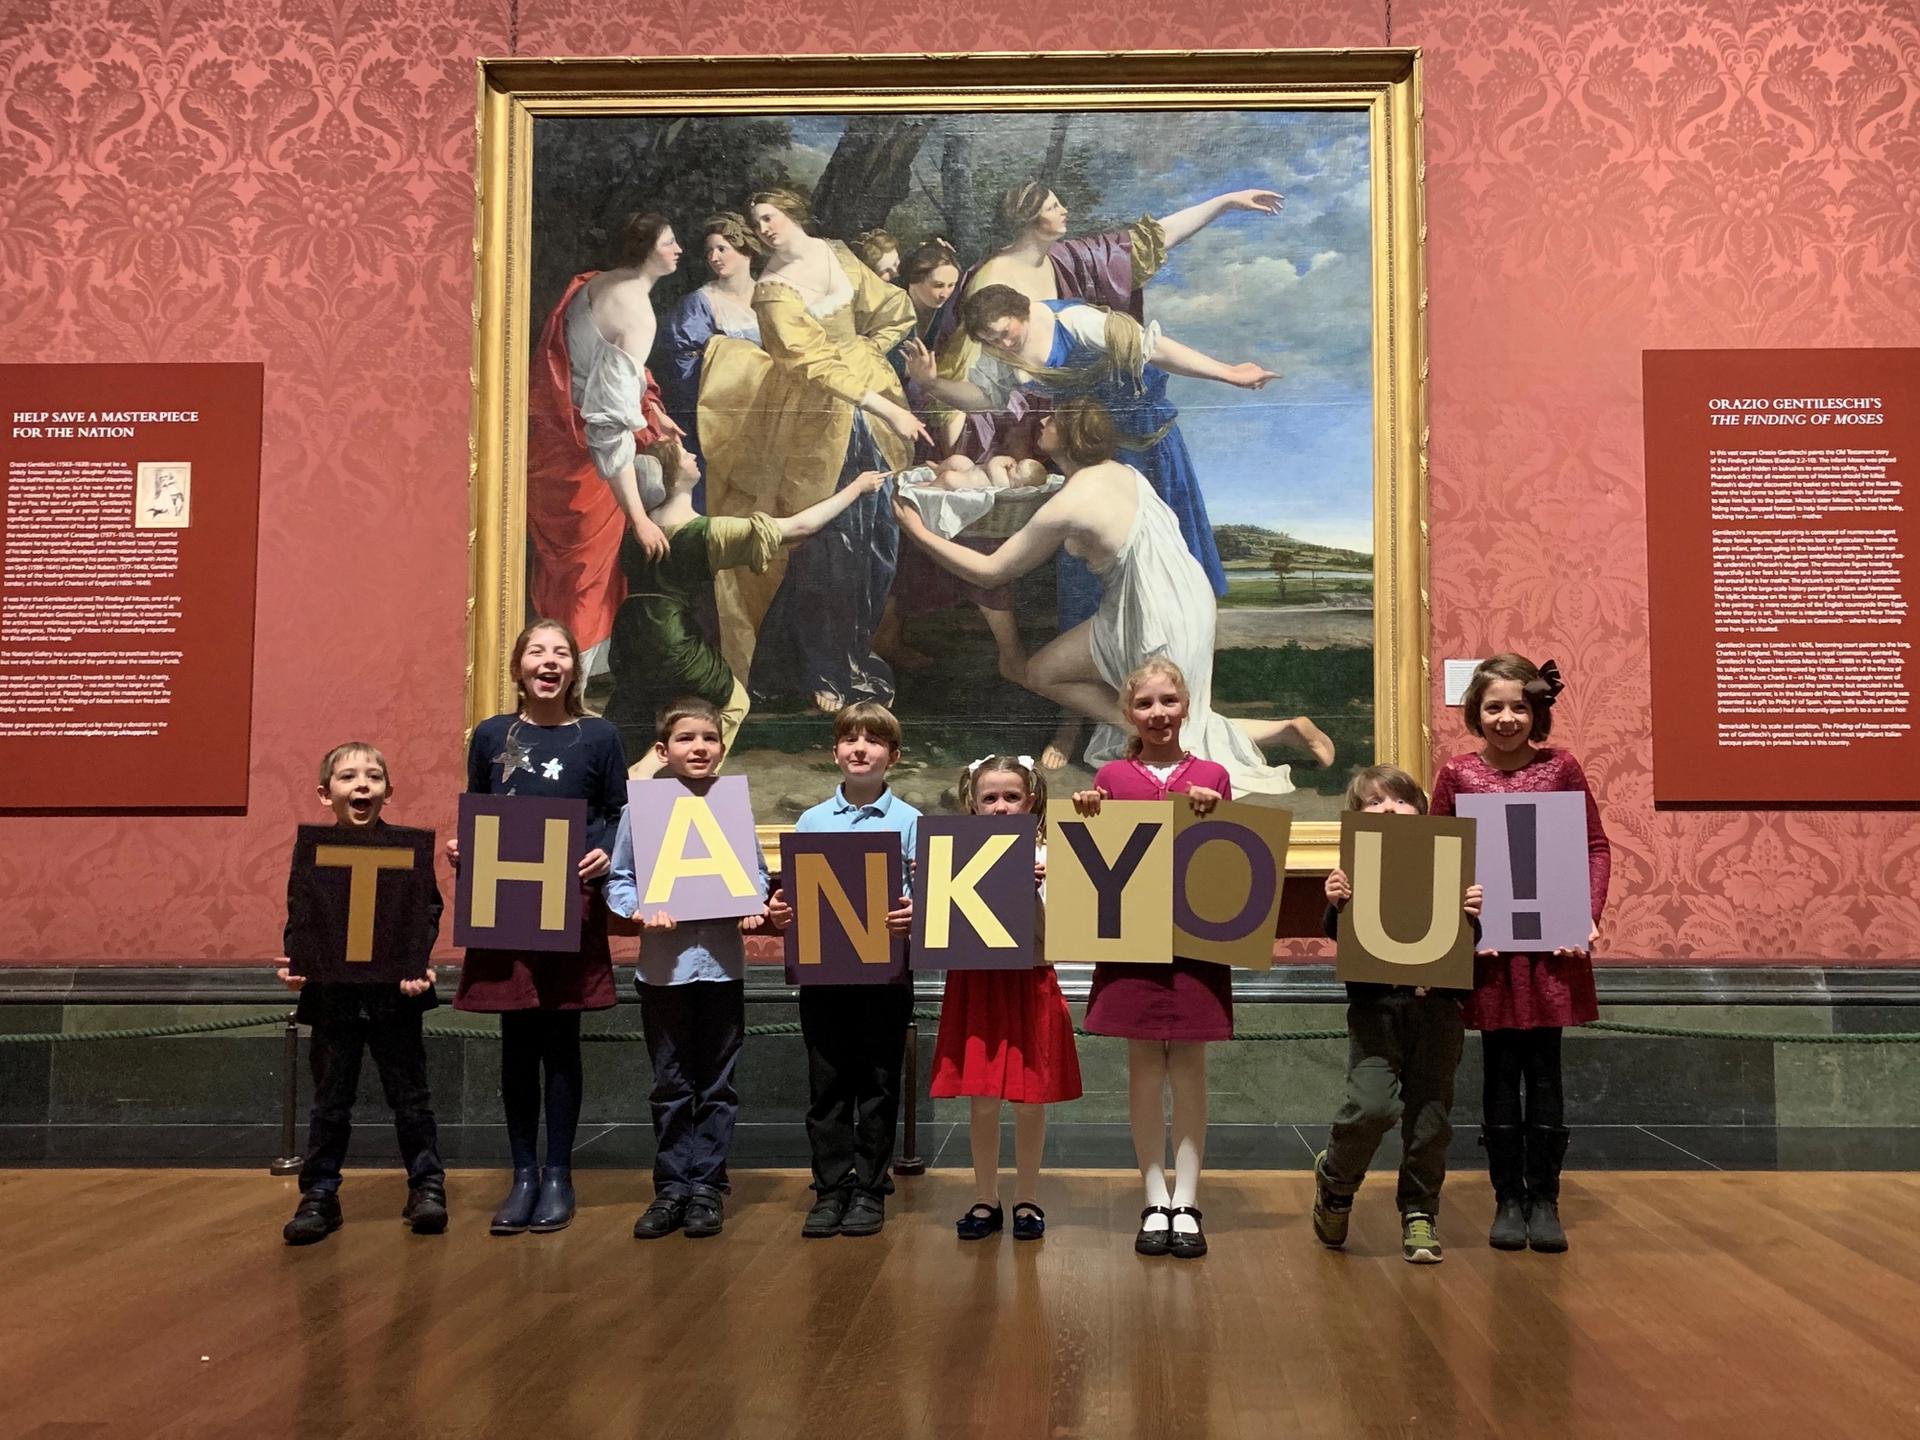 Children visiting the National Gallery say thank you to the public in front of the The Finding of Moses Photo: © The National Gallery, London